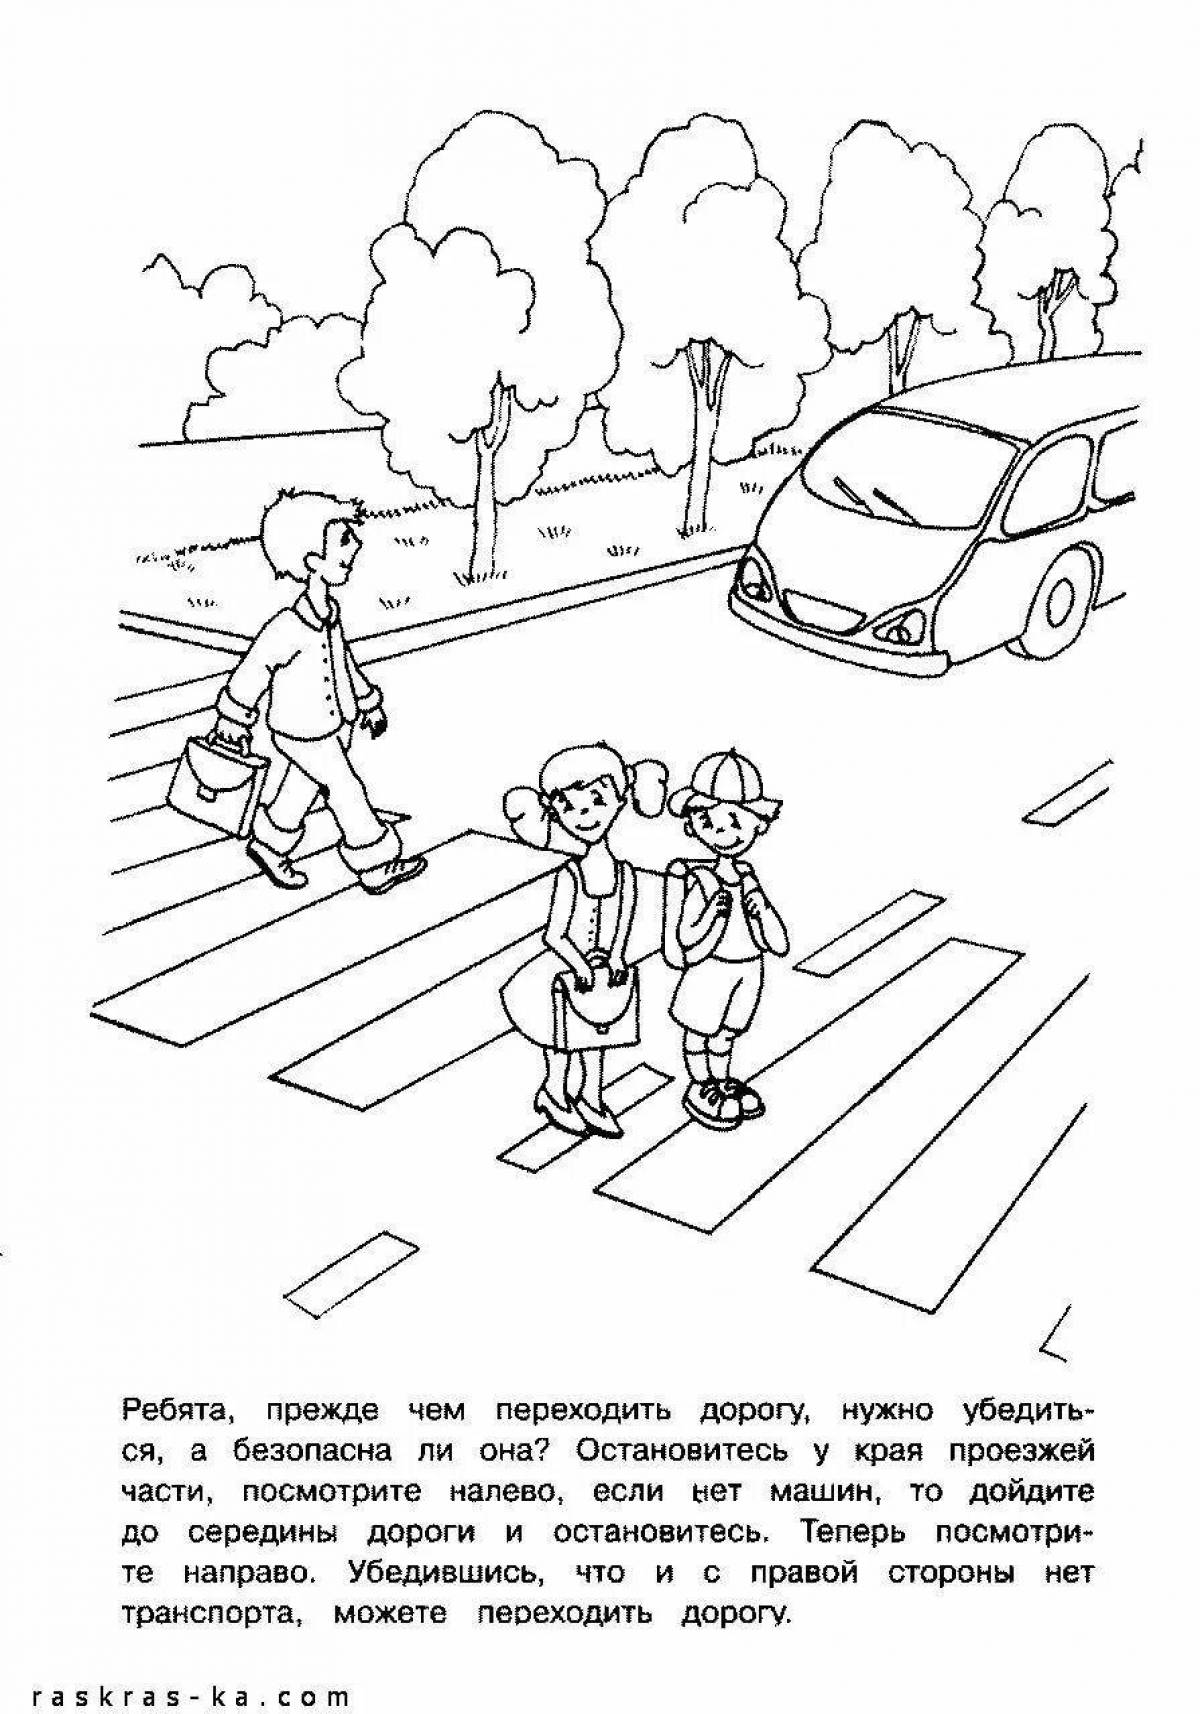 A fascinating coloring book of the rules of the road in winter for children